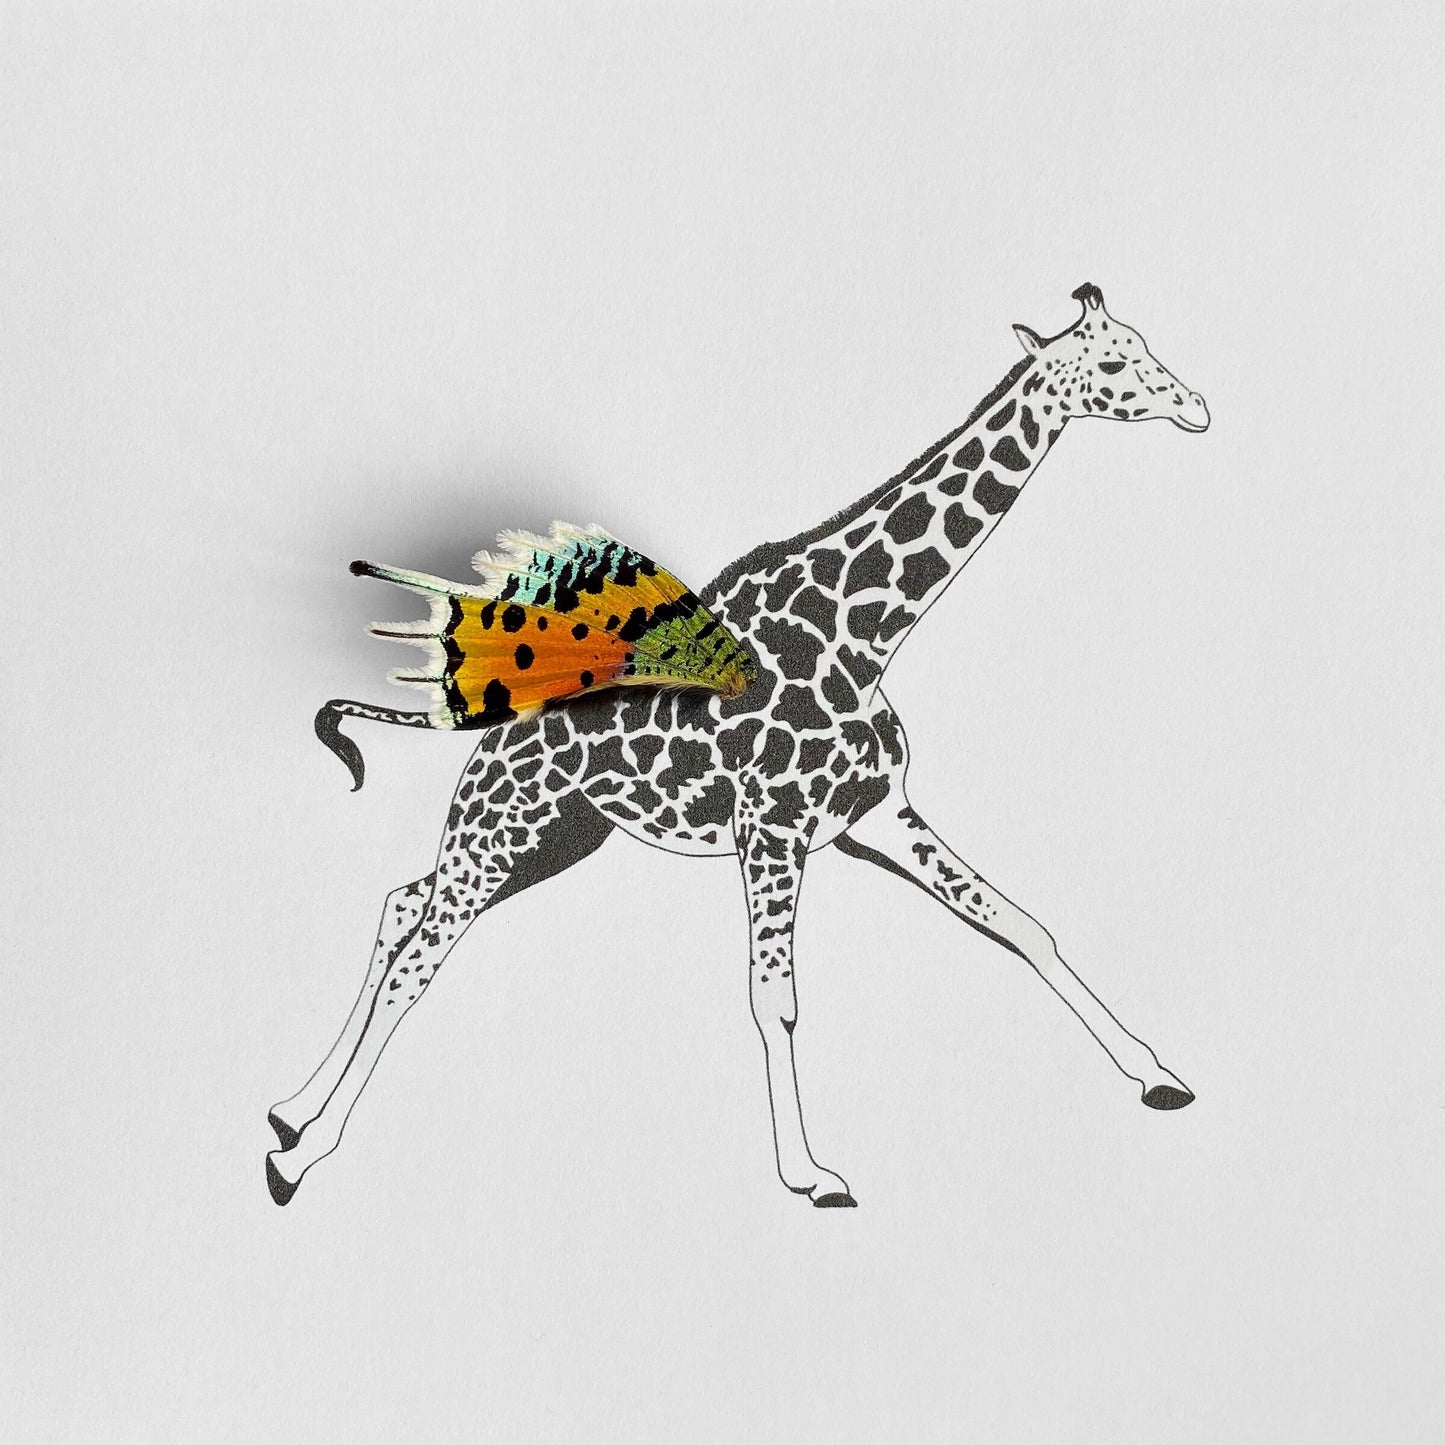 Giraffe Real Butterfly Wing Framed Art Ethically Sourced Made in MN USA - Holly Ulm - Isms Butterfly Conservation Art